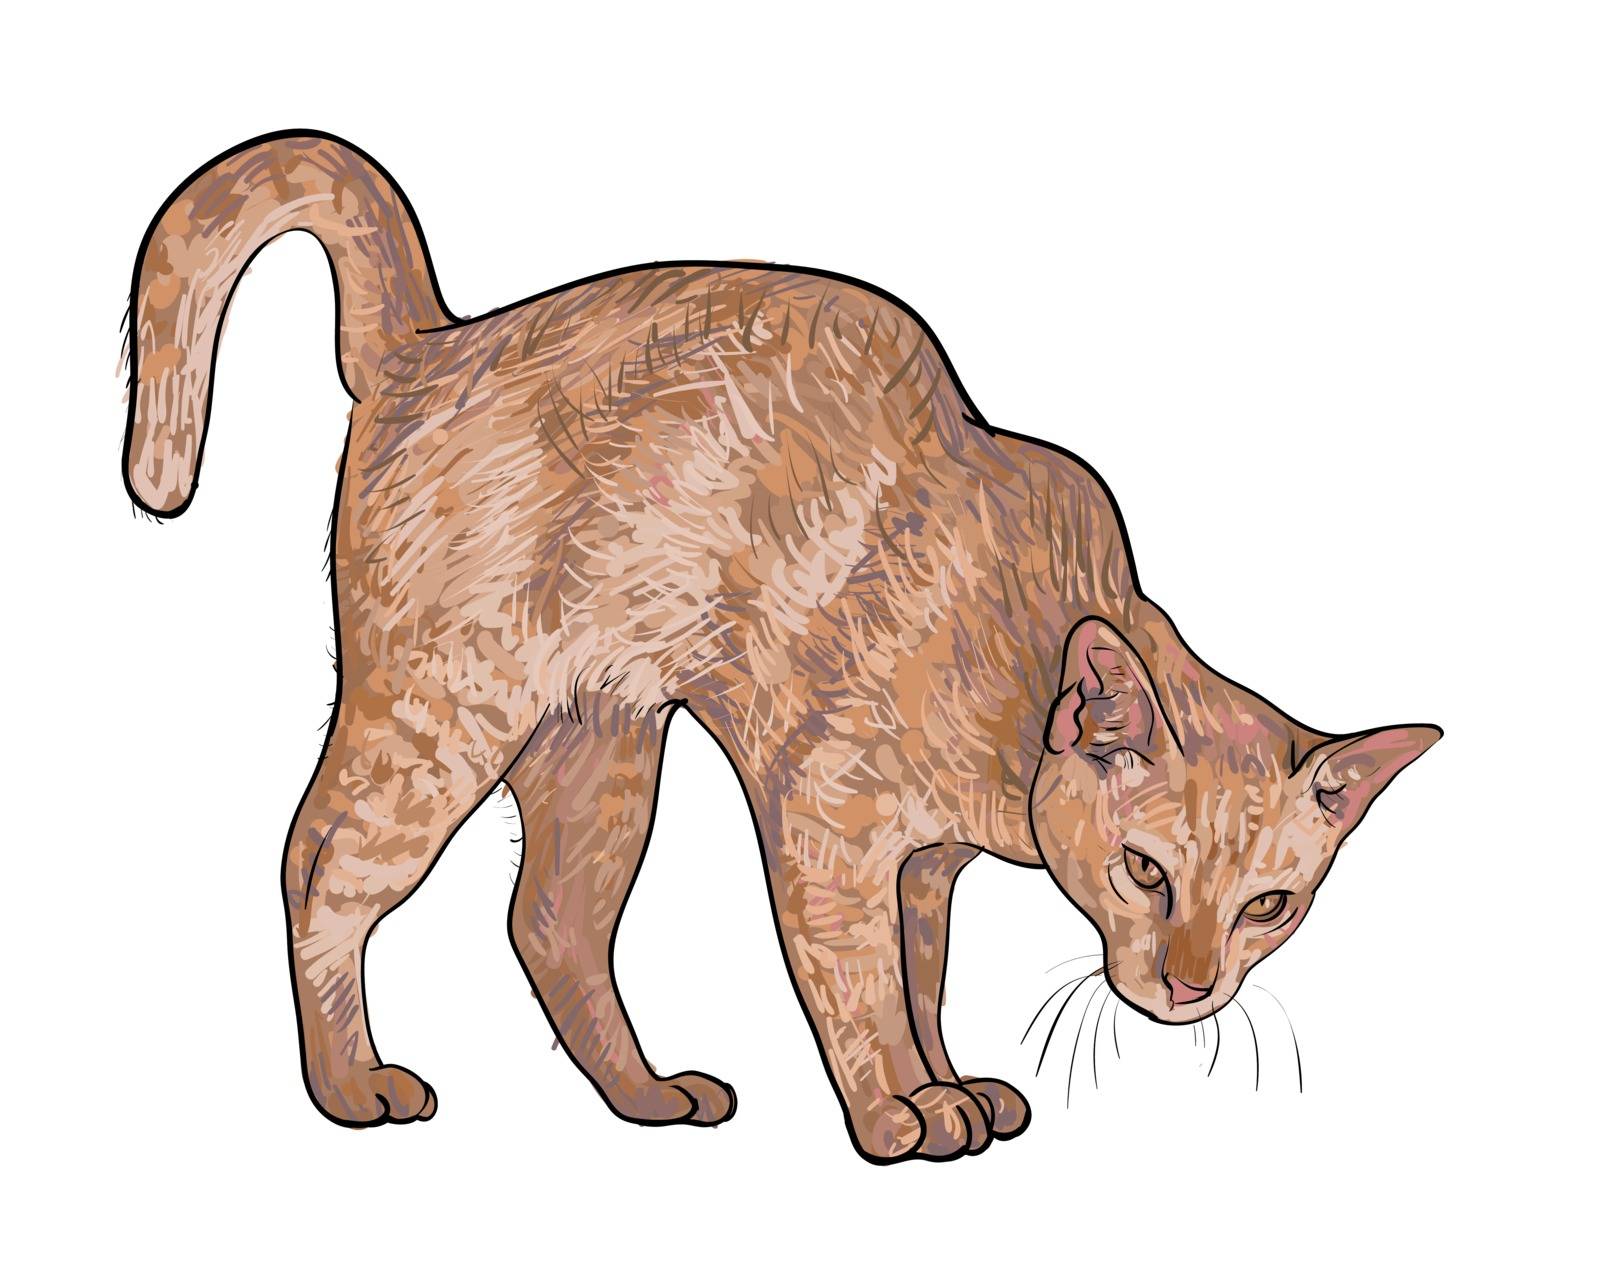 Drawing of threaten cat on white background